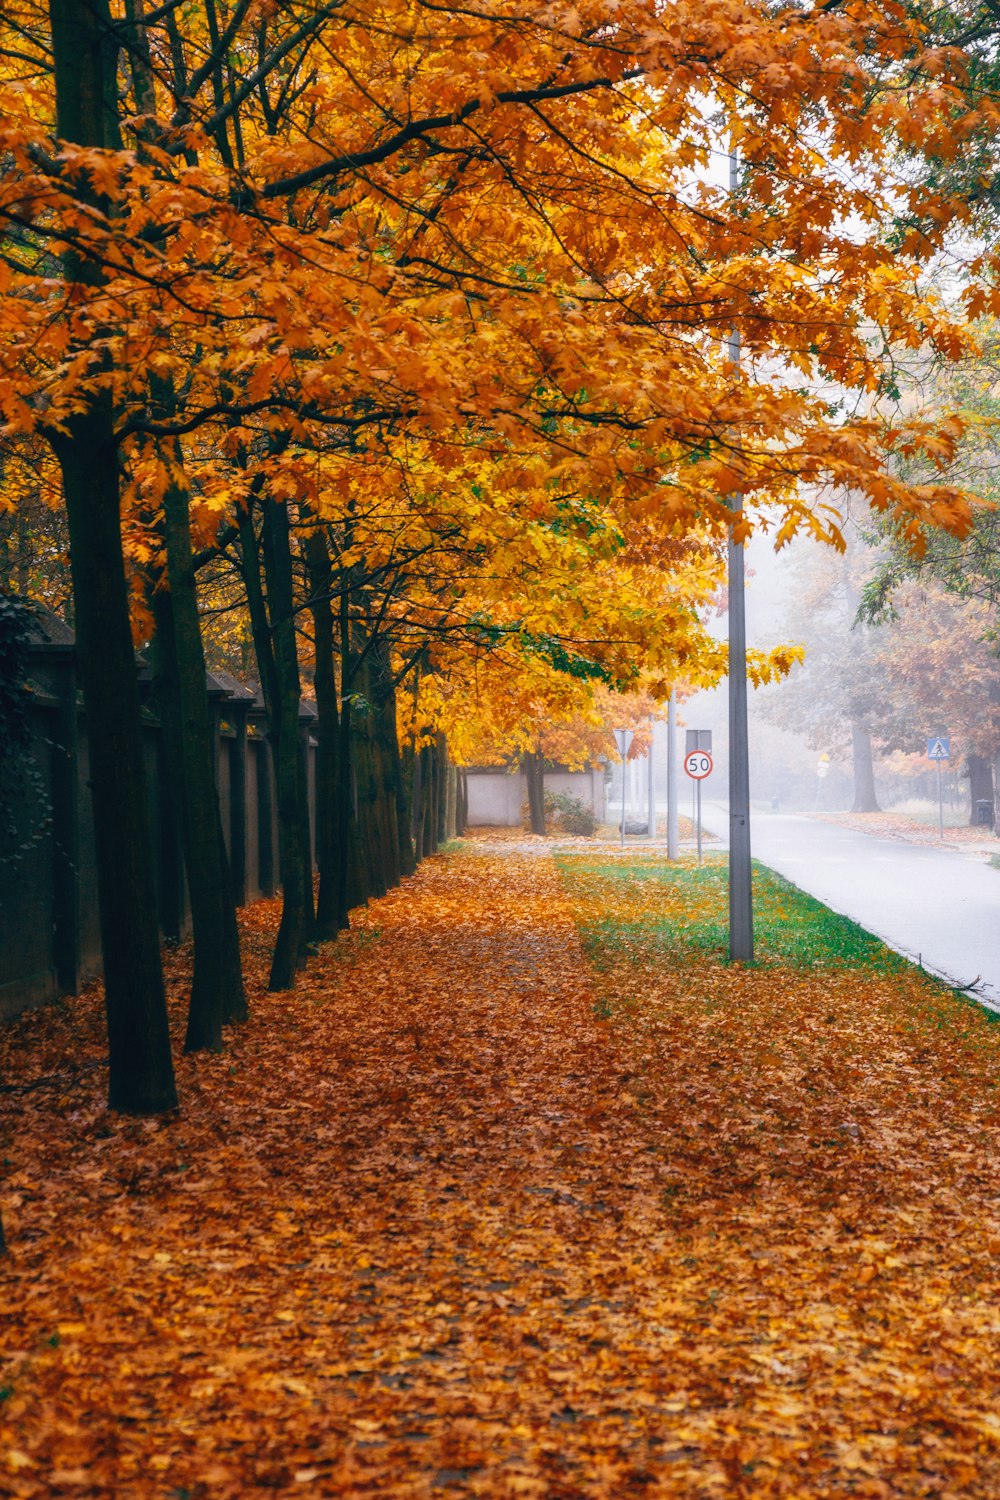 a street lined with trees with yellow leaves on the ground